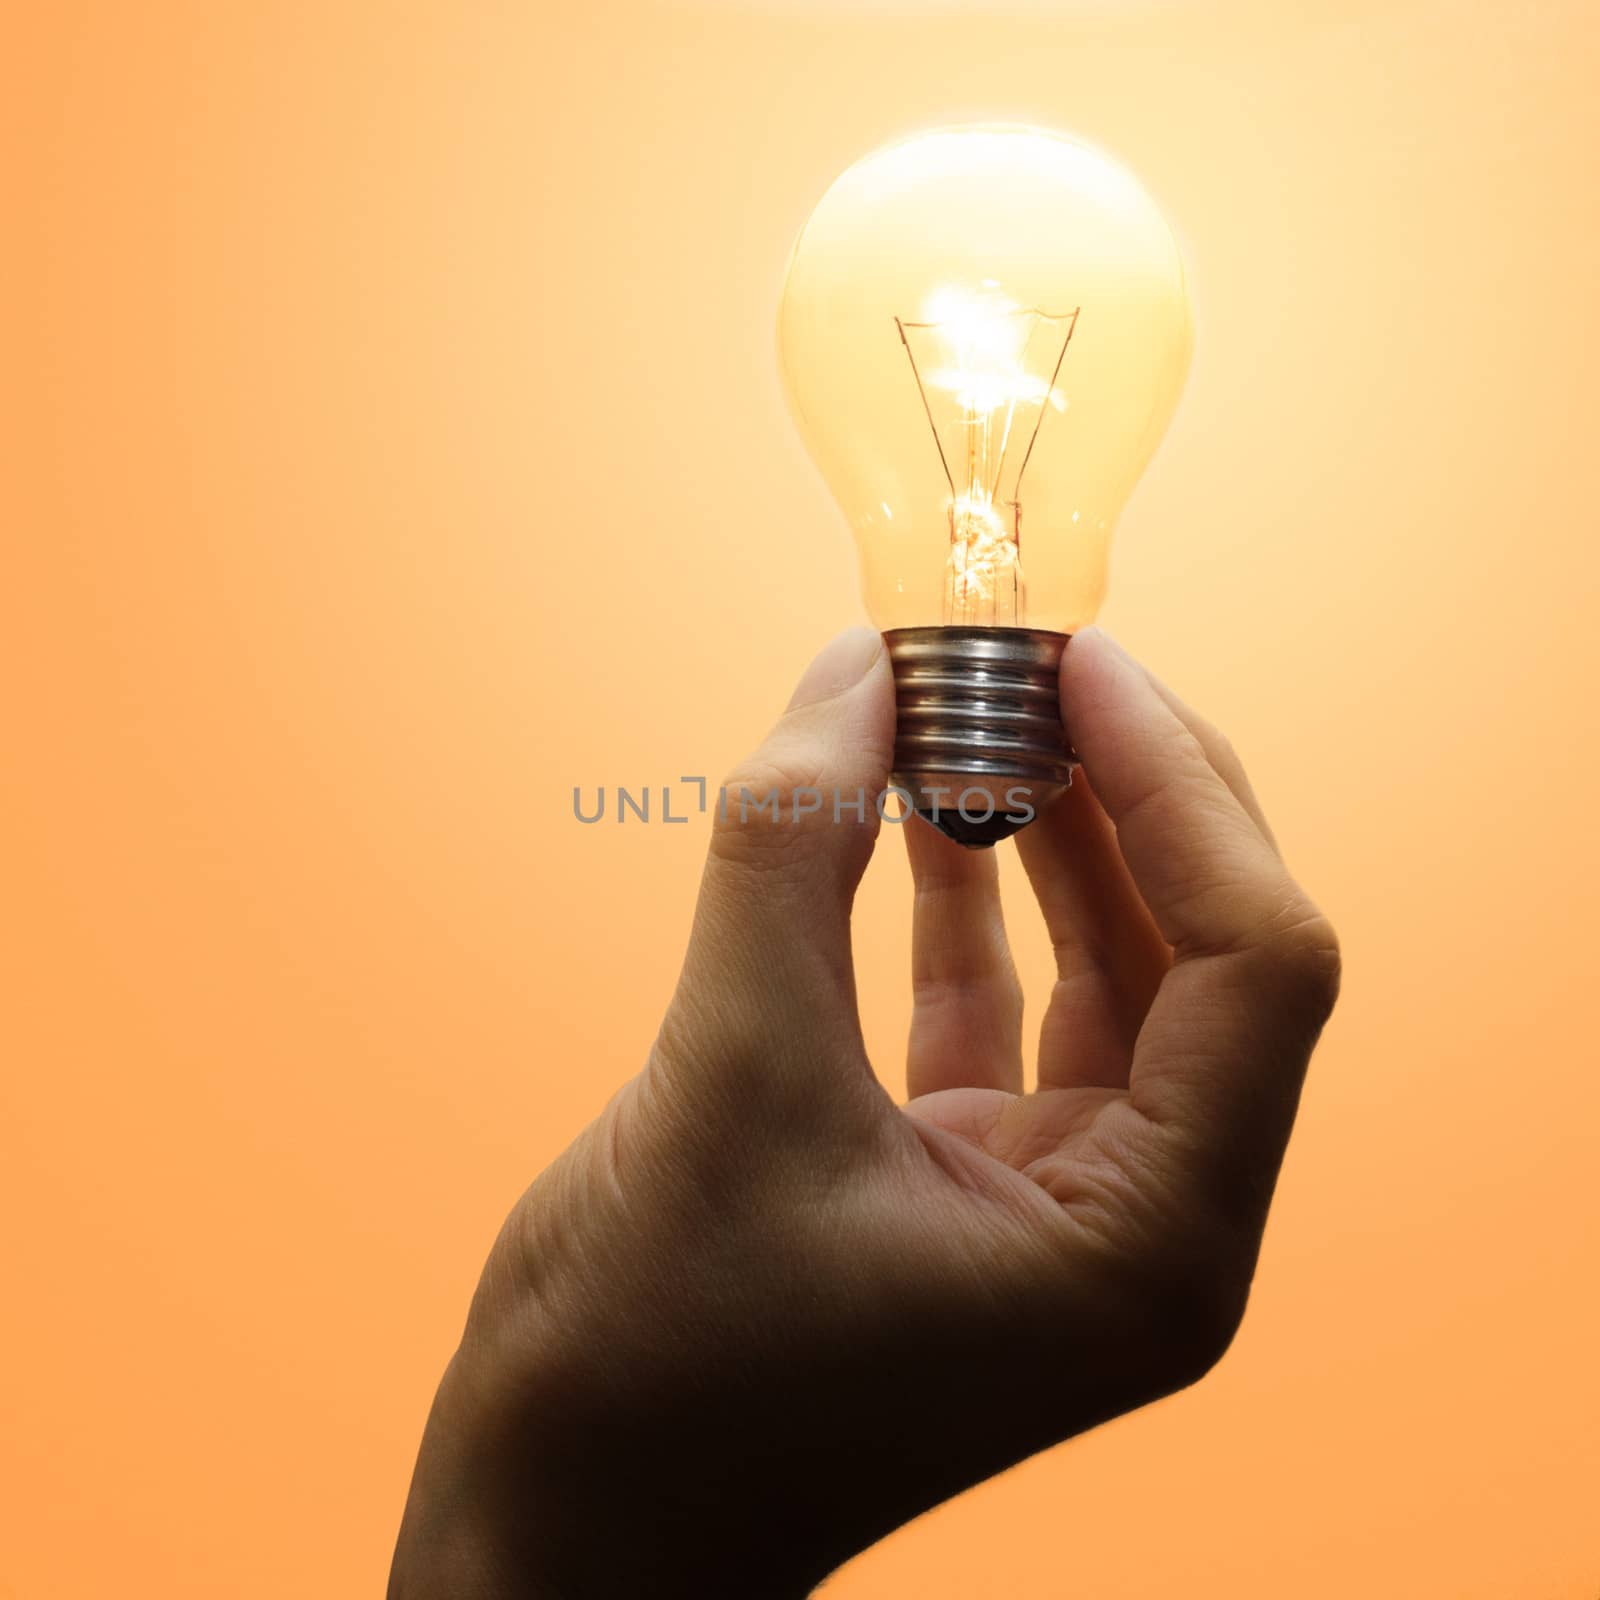 Luminescent light bulb in human hand by nprause